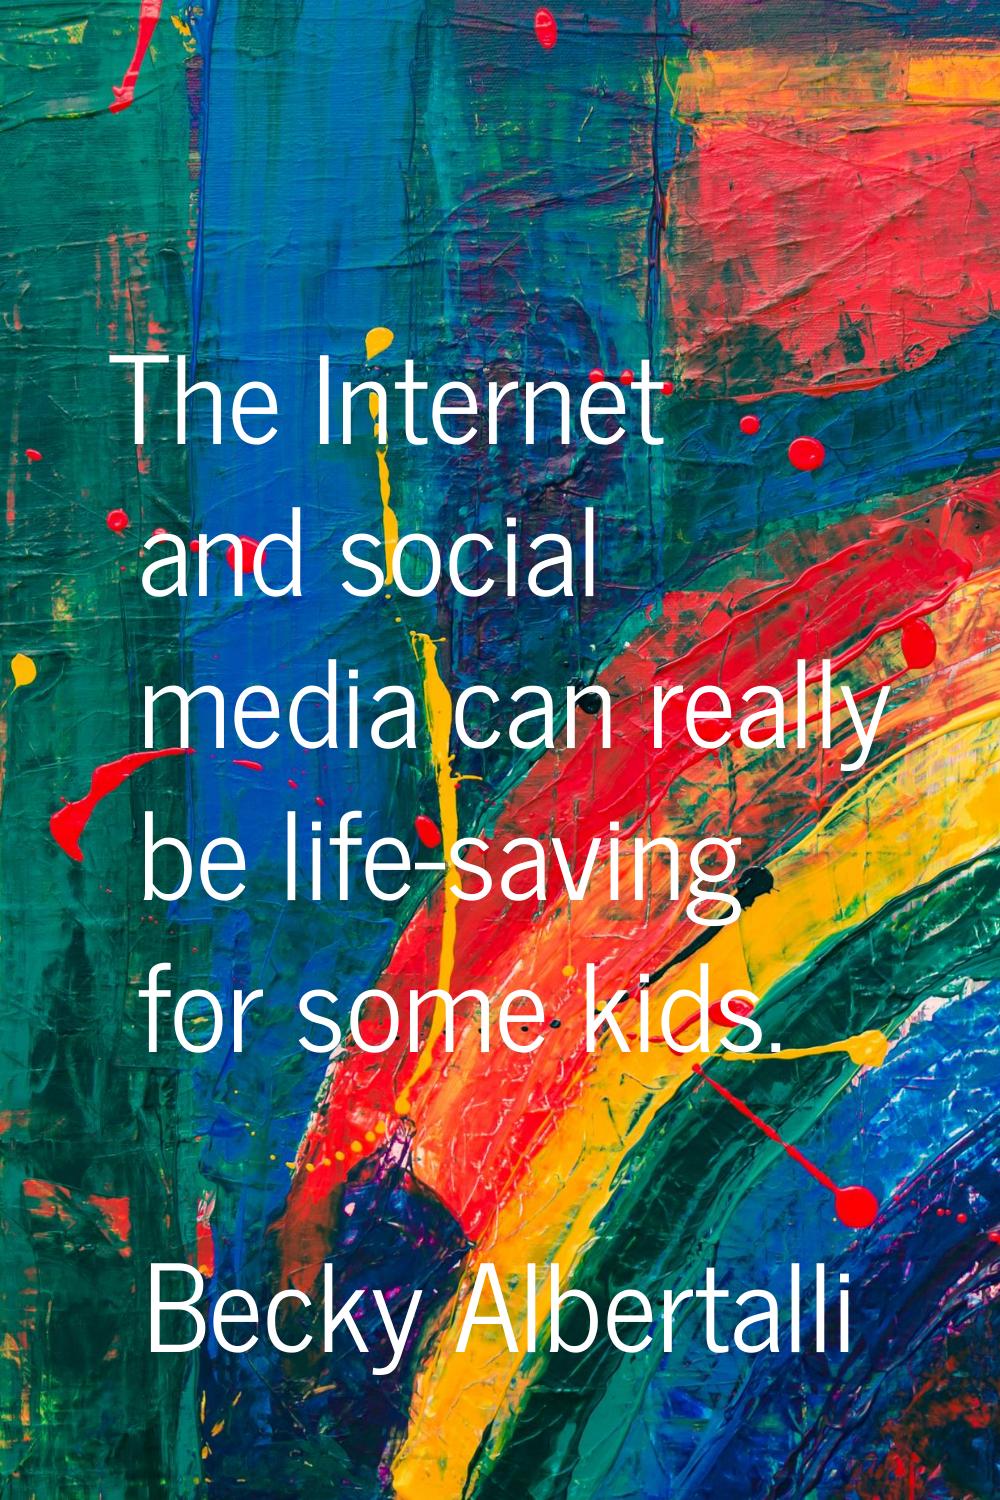 The Internet and social media can really be life-saving for some kids.